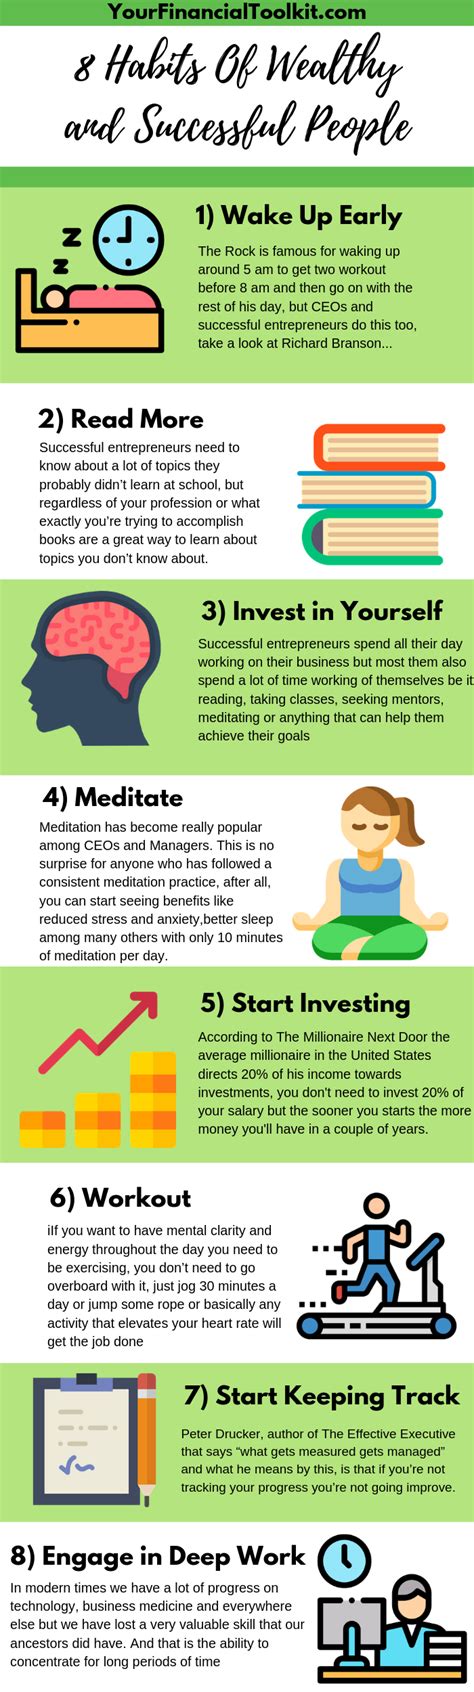 8 Habits Of Wealthy and Successful People | Finance infographic ...